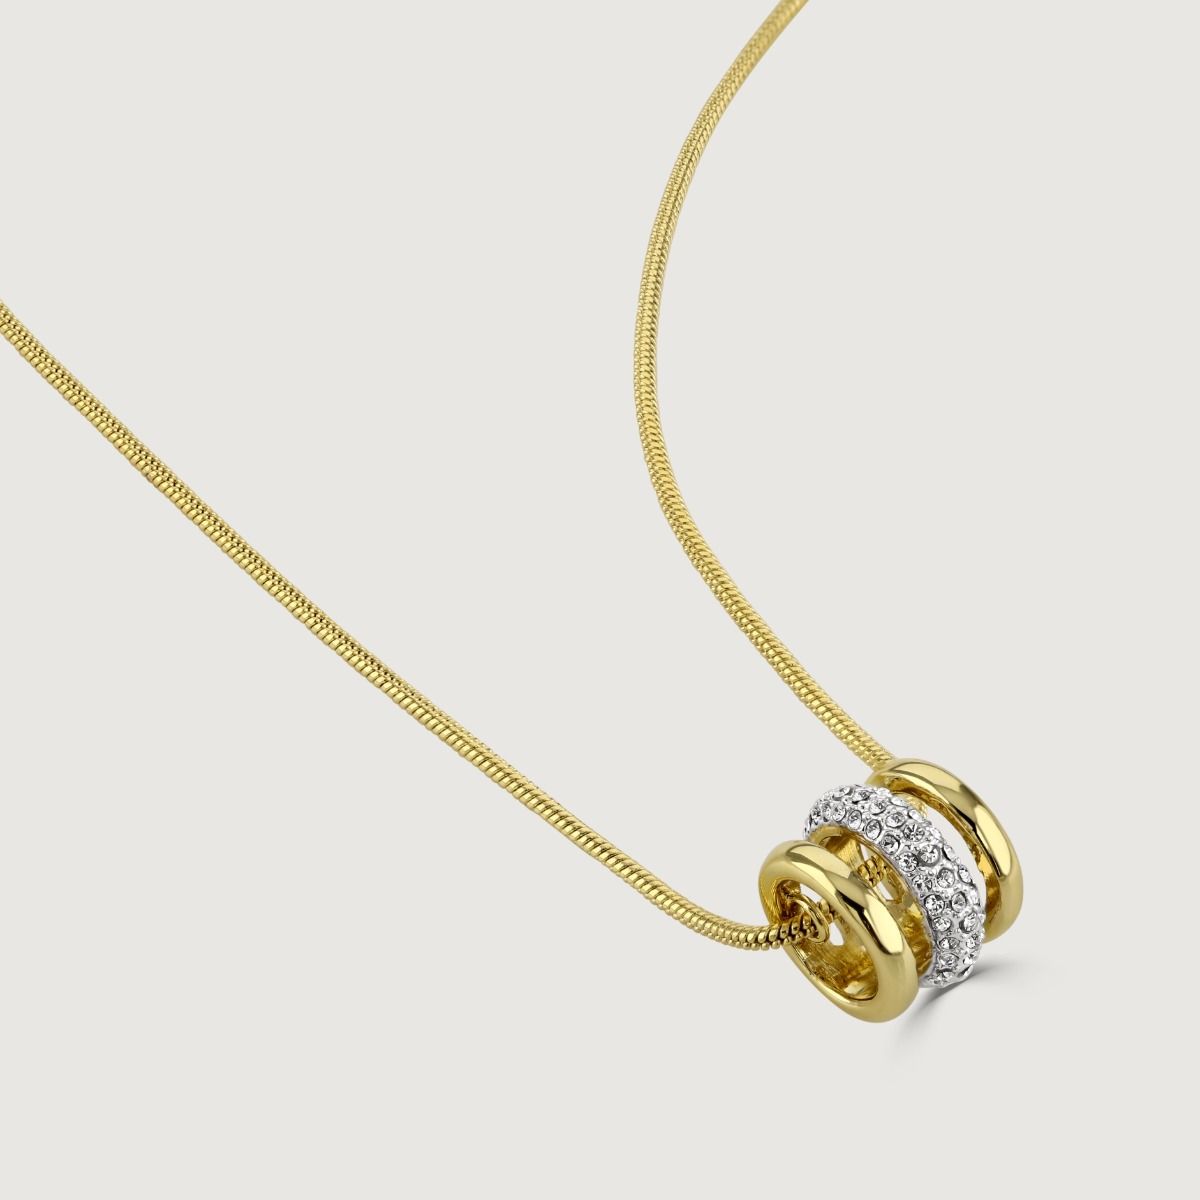 Simple and chic, the Aspire pendant is the perfect accessory for any outfit. Suspended from a sleek gold plated snake chain, the pendant features shimmering pave set crystals set into rhodium plating, wrapped between two bands of polished gold plate. Wea